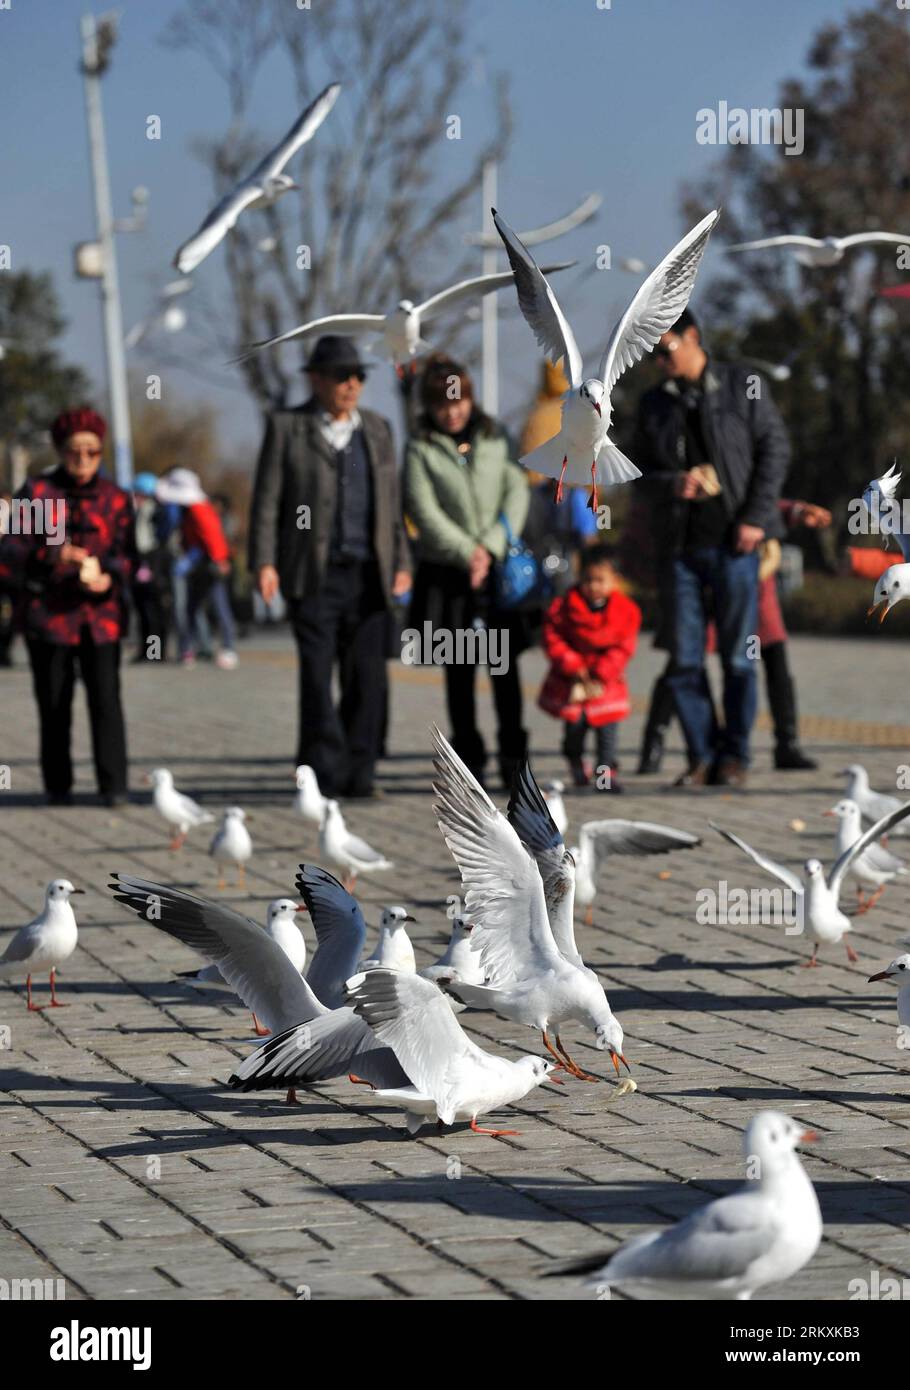 Bildnummer: 58966962  Datum: 06.01.2013  Copyright: imago/Xinhua (130106) -- KUNMING, Jan. 6, 2013 (Xinhua) -- Citizens play with black-headed gulls on Caohai Levee of Dianchi Lake in Kunming, capital of southwest China s Yunnan Province, Jan. 6. More than 35,000 black-headed gulls chose to spend winter in Kunming this year thanks to comfortable ecological environment in the city. (Xinhua/Lin Yiguang) (lh) (lfj) CHINA-YUNNAN-KUNMING-BLACK-HEADED GULLS (CN) PUBLICATIONxNOTxINxCHN Gesellschaft Vogel Möwe x0x xmb 2013 hoch      58966962 Date 06 01 2013 Copyright Imago XINHUA  Kunming Jan 6 2013 X Stock Photo